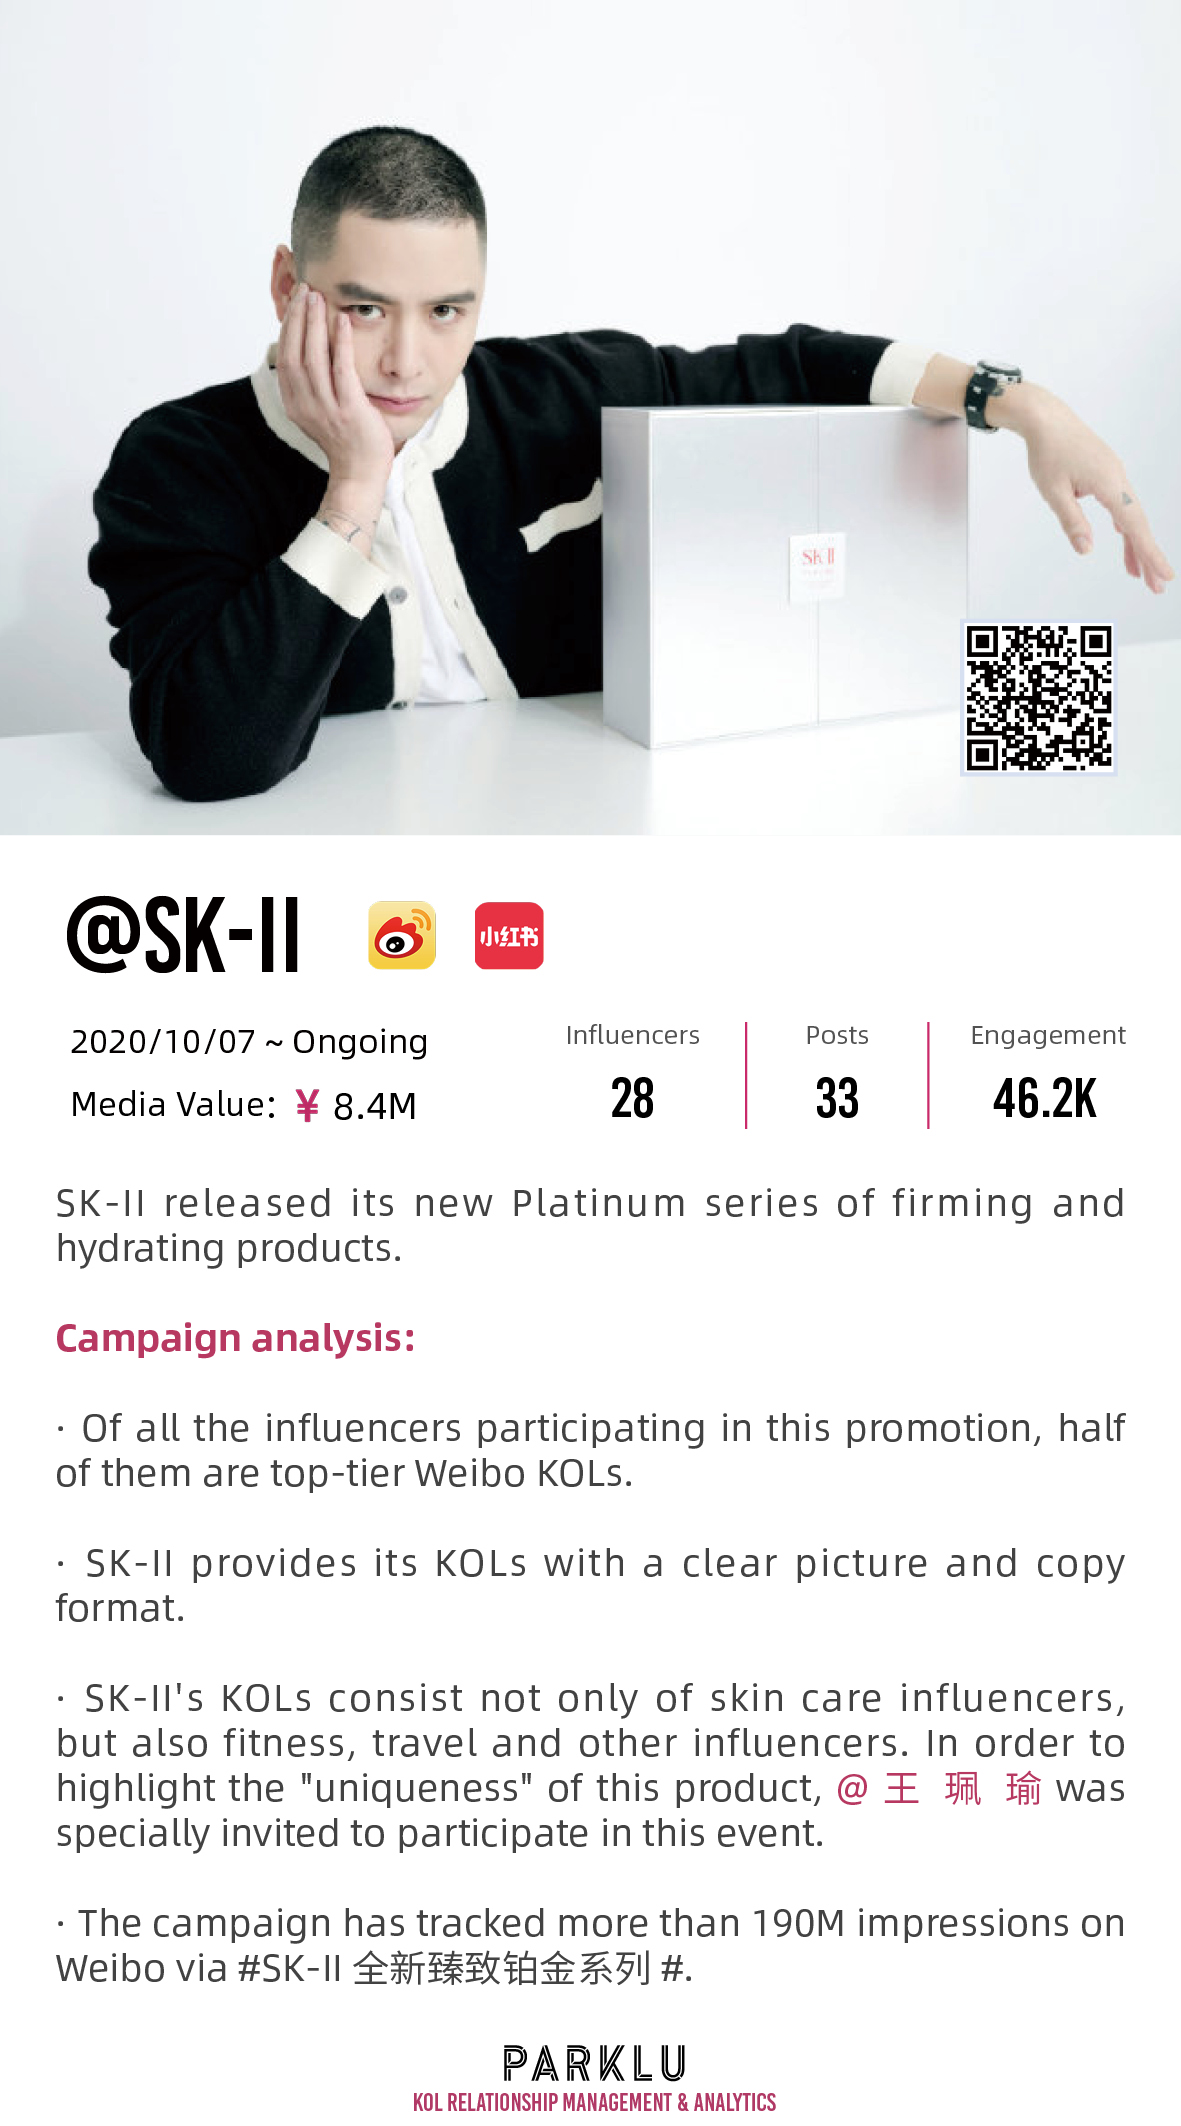 SK-II released its new Platinum series of firming and hydrating products